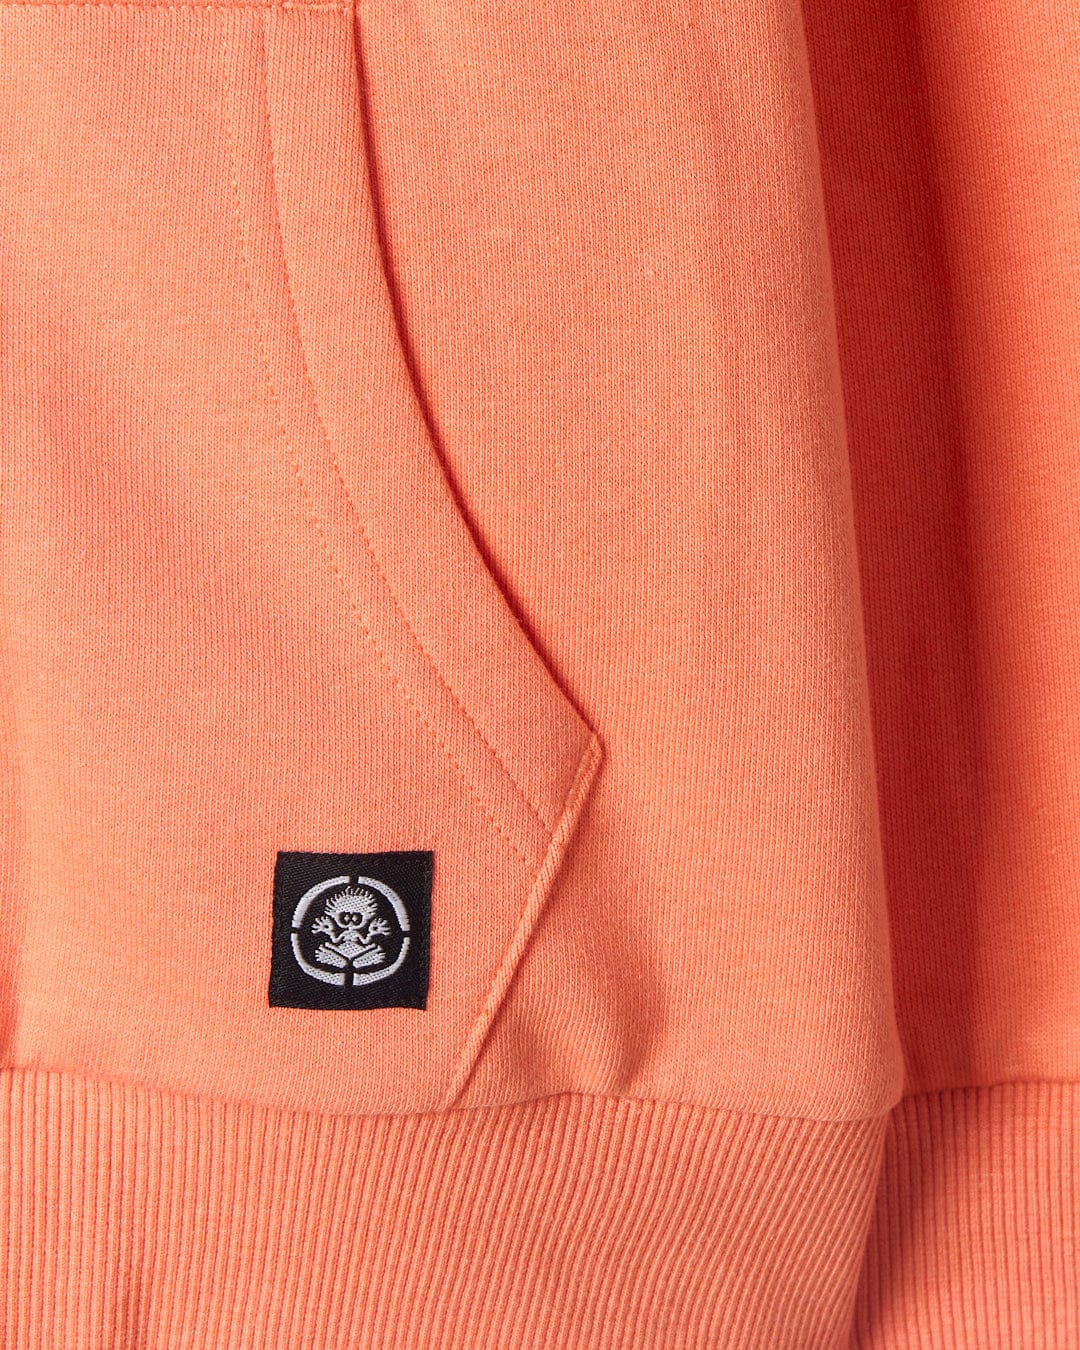 Close-up of a Waveline - Kids Borg Lined Zip Hoodie in Coral by Saltrock, featuring a small black label stitched on with a stylized white lion logo.